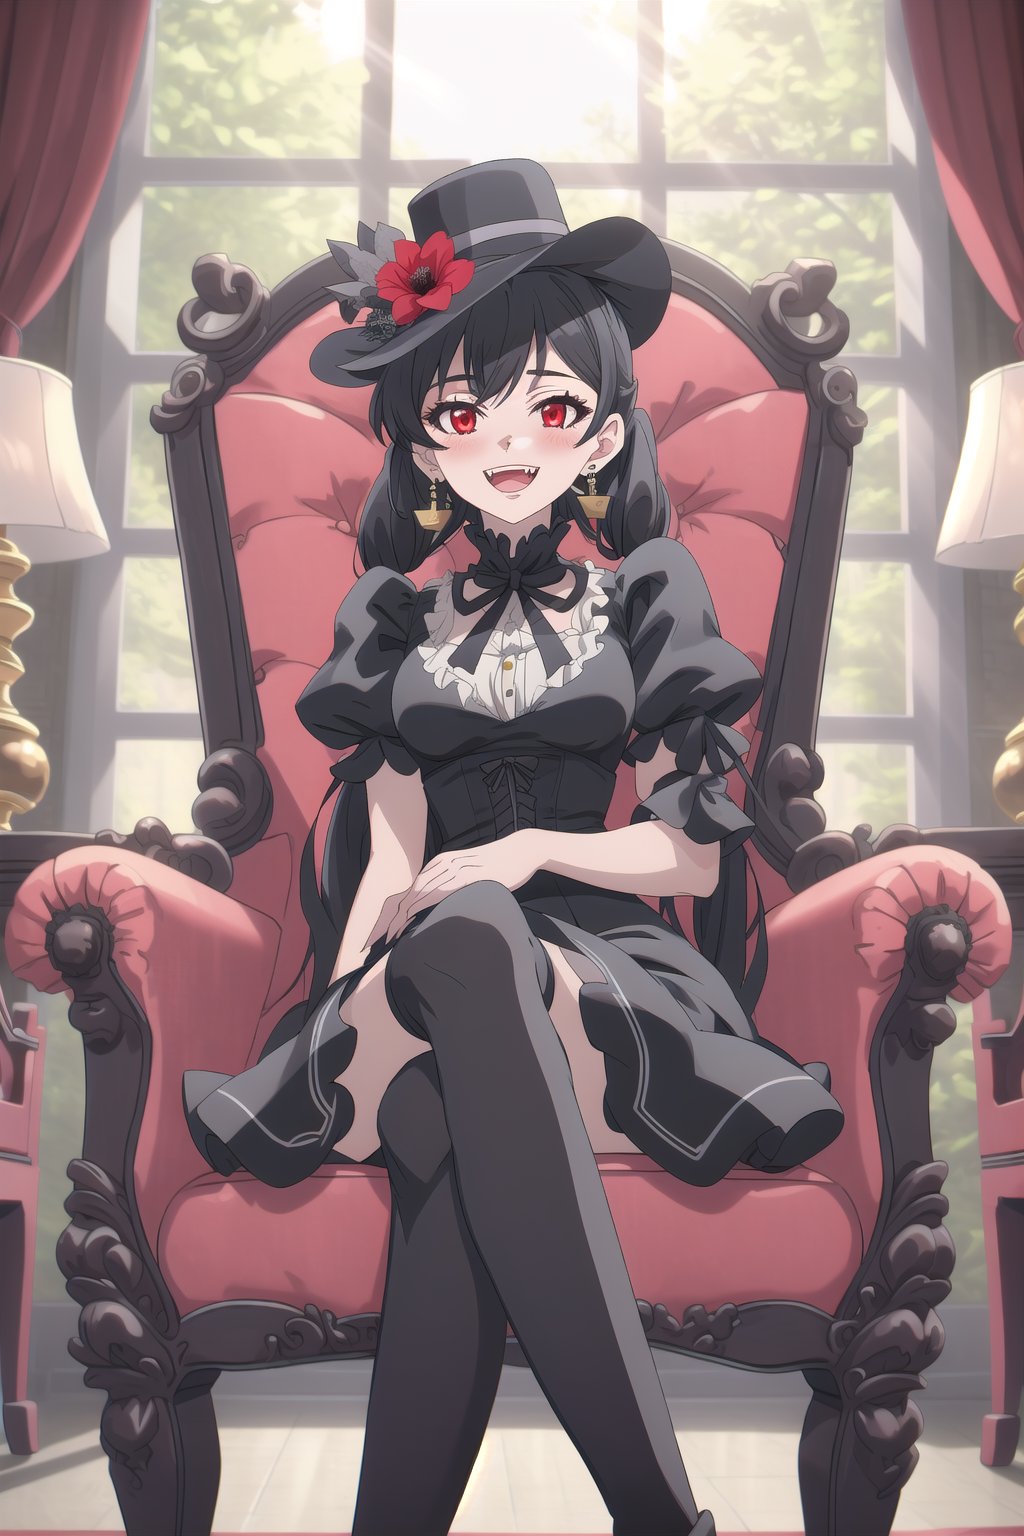 nier anime style illustration, best quality, masterpiece High resolution, good detail, bright colors, HDR, 4K. Dolby vision high.

Girl with long straight black hair, long twin pigtails. Red eyes, blushing, black earrings 

Black Victorian Style Black Dress 

black stockings 

Elegant black boots

Victorian hat with a red flower 

Inside a stylish steampunk room of canvas paintings 

Abecer 

Sun rays coming through the window 

Sitting 

red armchair 

Flirty smile (yandere smile). Happy, excited. Open mouth

,nier anime style

Showing fangs, exposed fangs